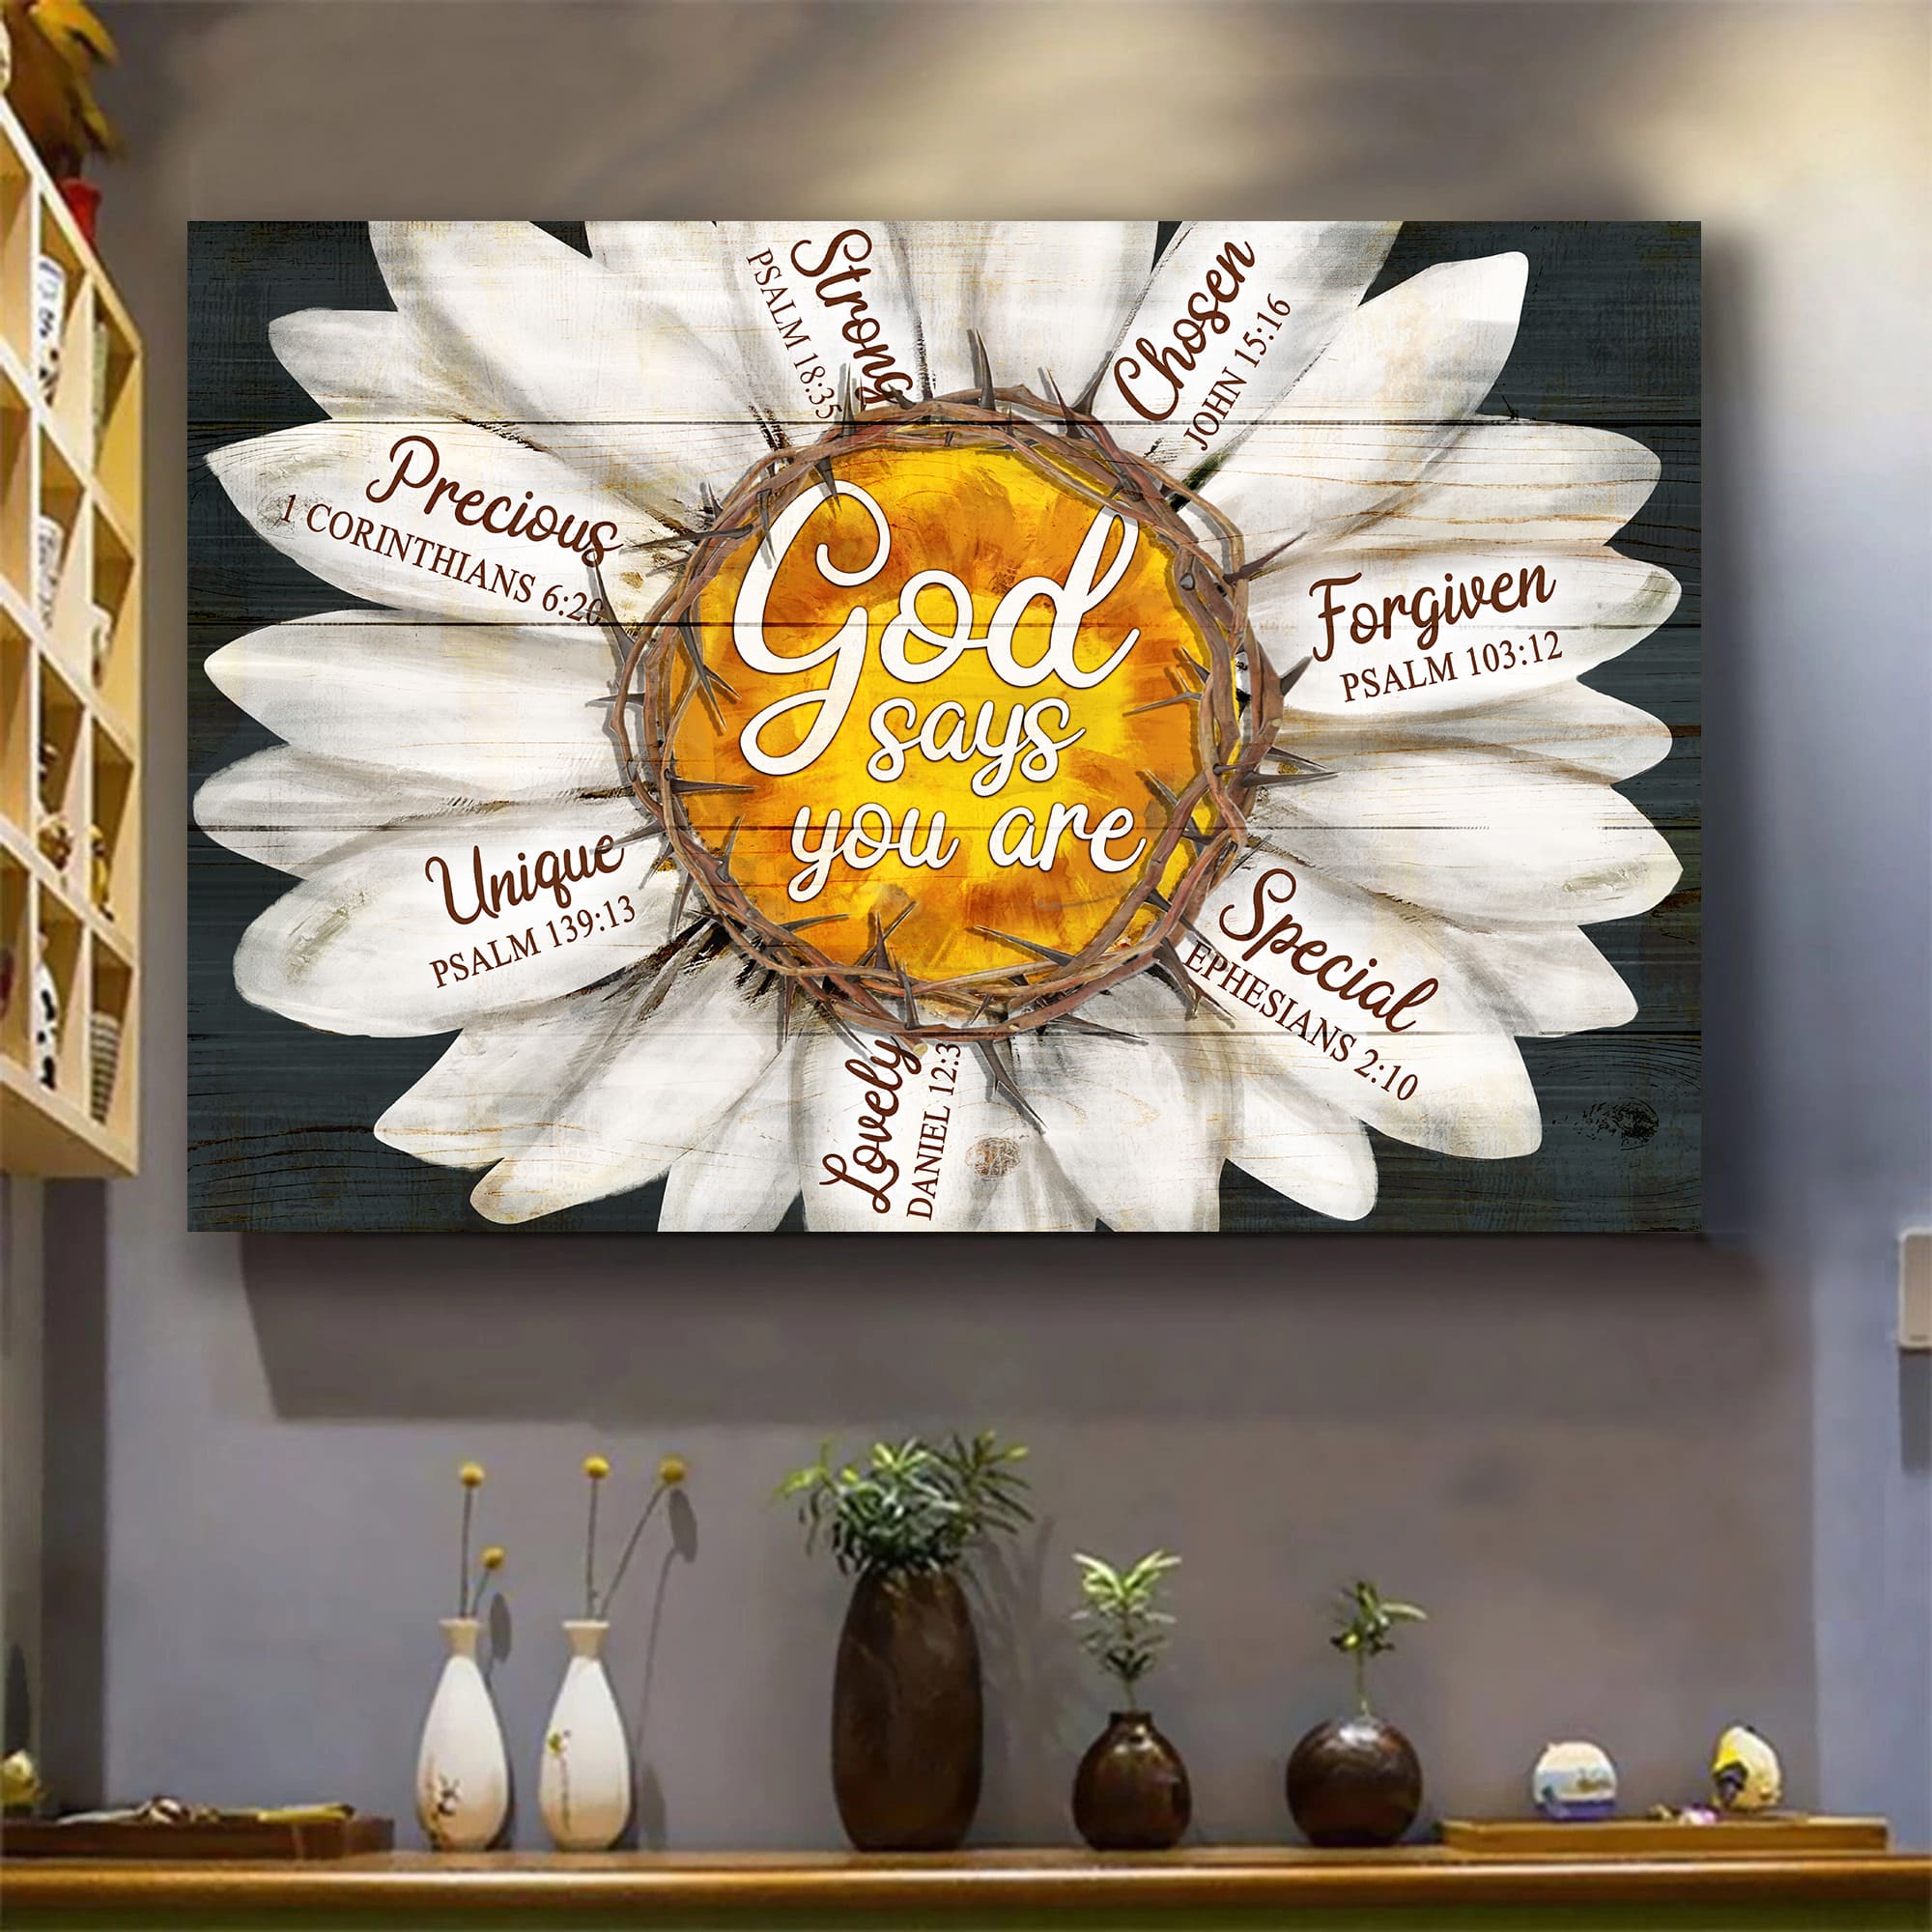 Daisy flower, God says you are - Jesus Landscape Canvas Prints, Wall Art